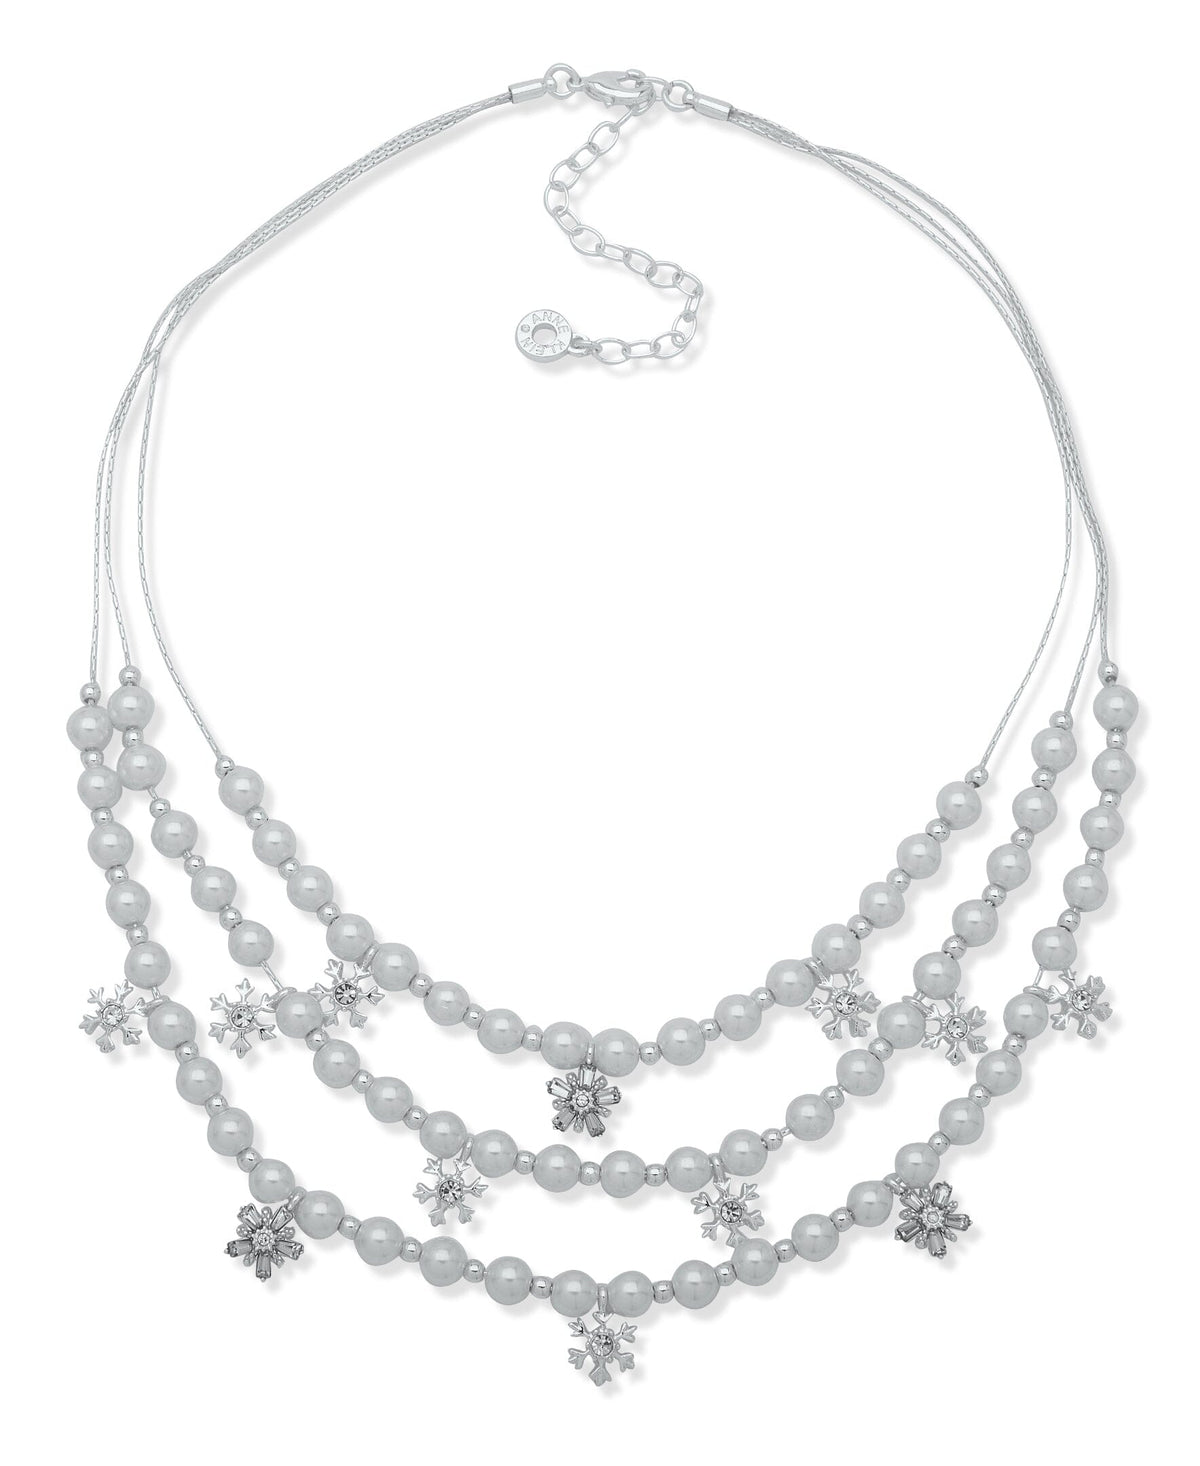 Anne Klein Silver Tone 3 Row Faux Pearl and Crystal Snowflake Necklace